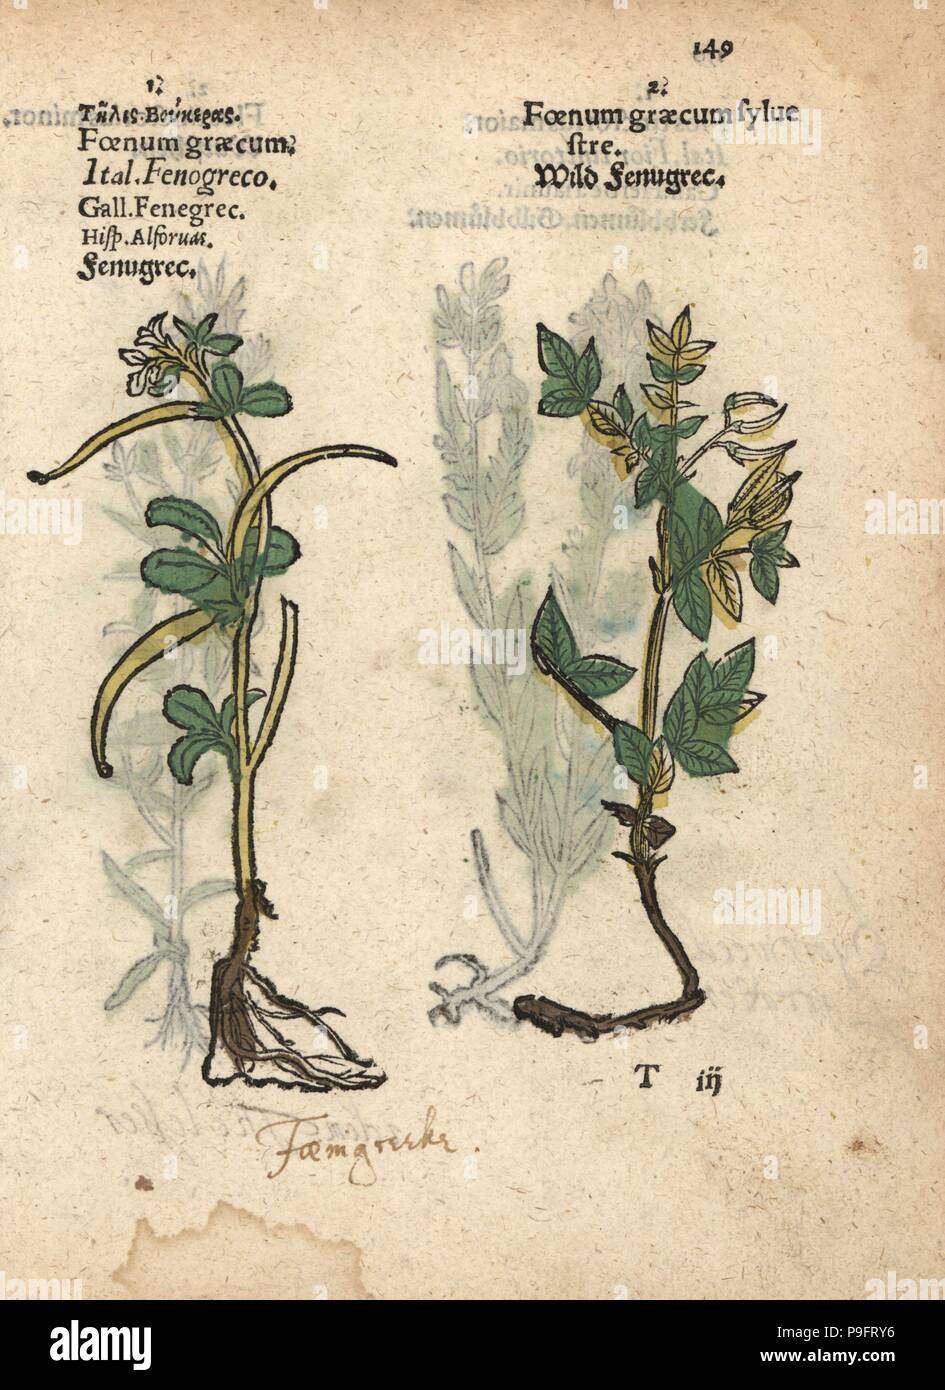 Fenugreek, Trigonella foenum-graecum, and wild fenugreek, Foenum-graecum sylvestre. Handcoloured woodblock engraving of a botanical illustration from Adam Lonicer's Krauterbuch, or Herbal, Frankfurt, 1557. This from a 17th century pirate edition or atlas of illustrations only, with captions in Latin, Greek, French, Italian, German, and in English manuscript. Stock Photo